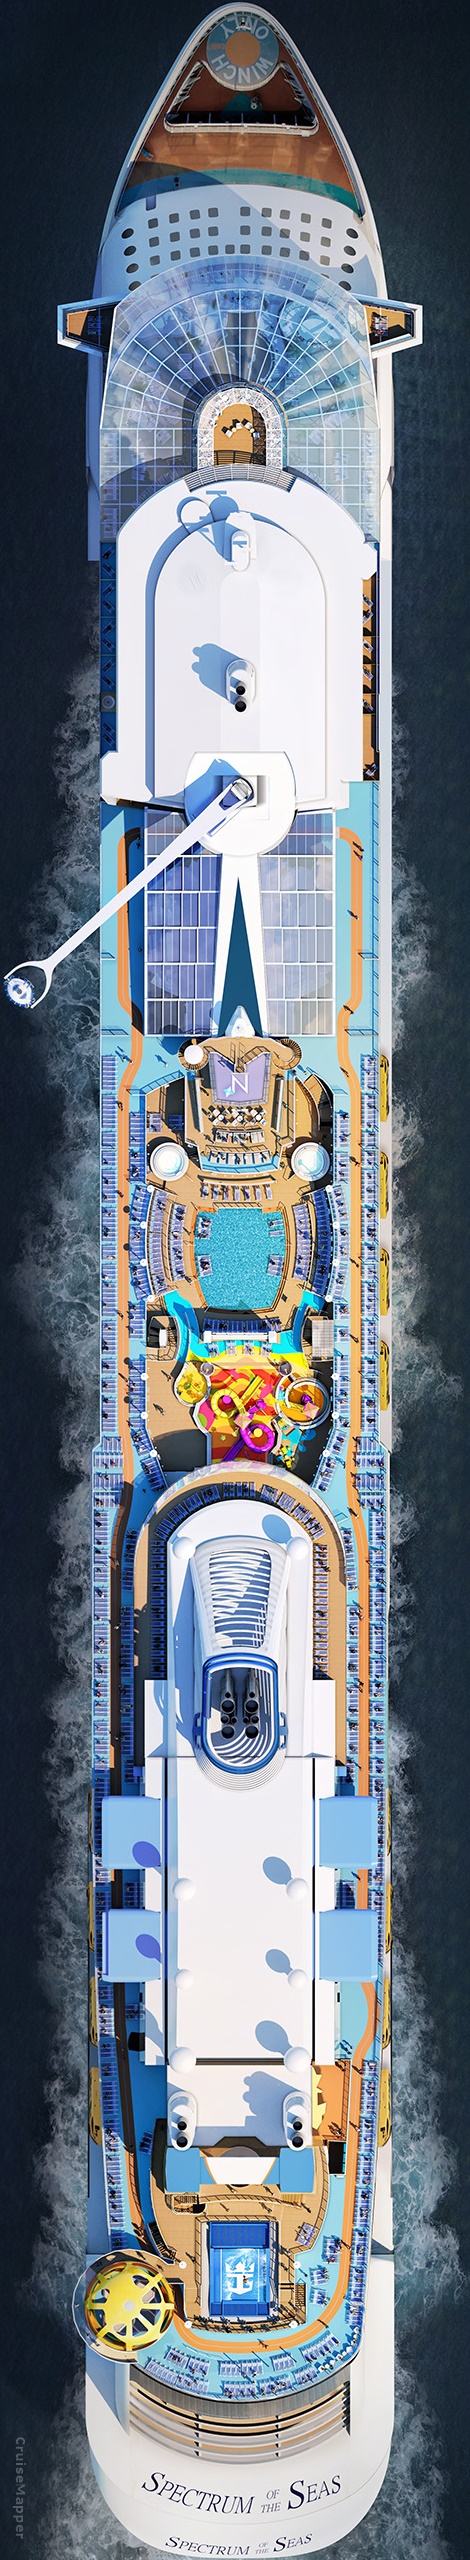 Royal Caribbean Group extends 'Cruise with Confidence' cancellation policy to all sailings through April 2022